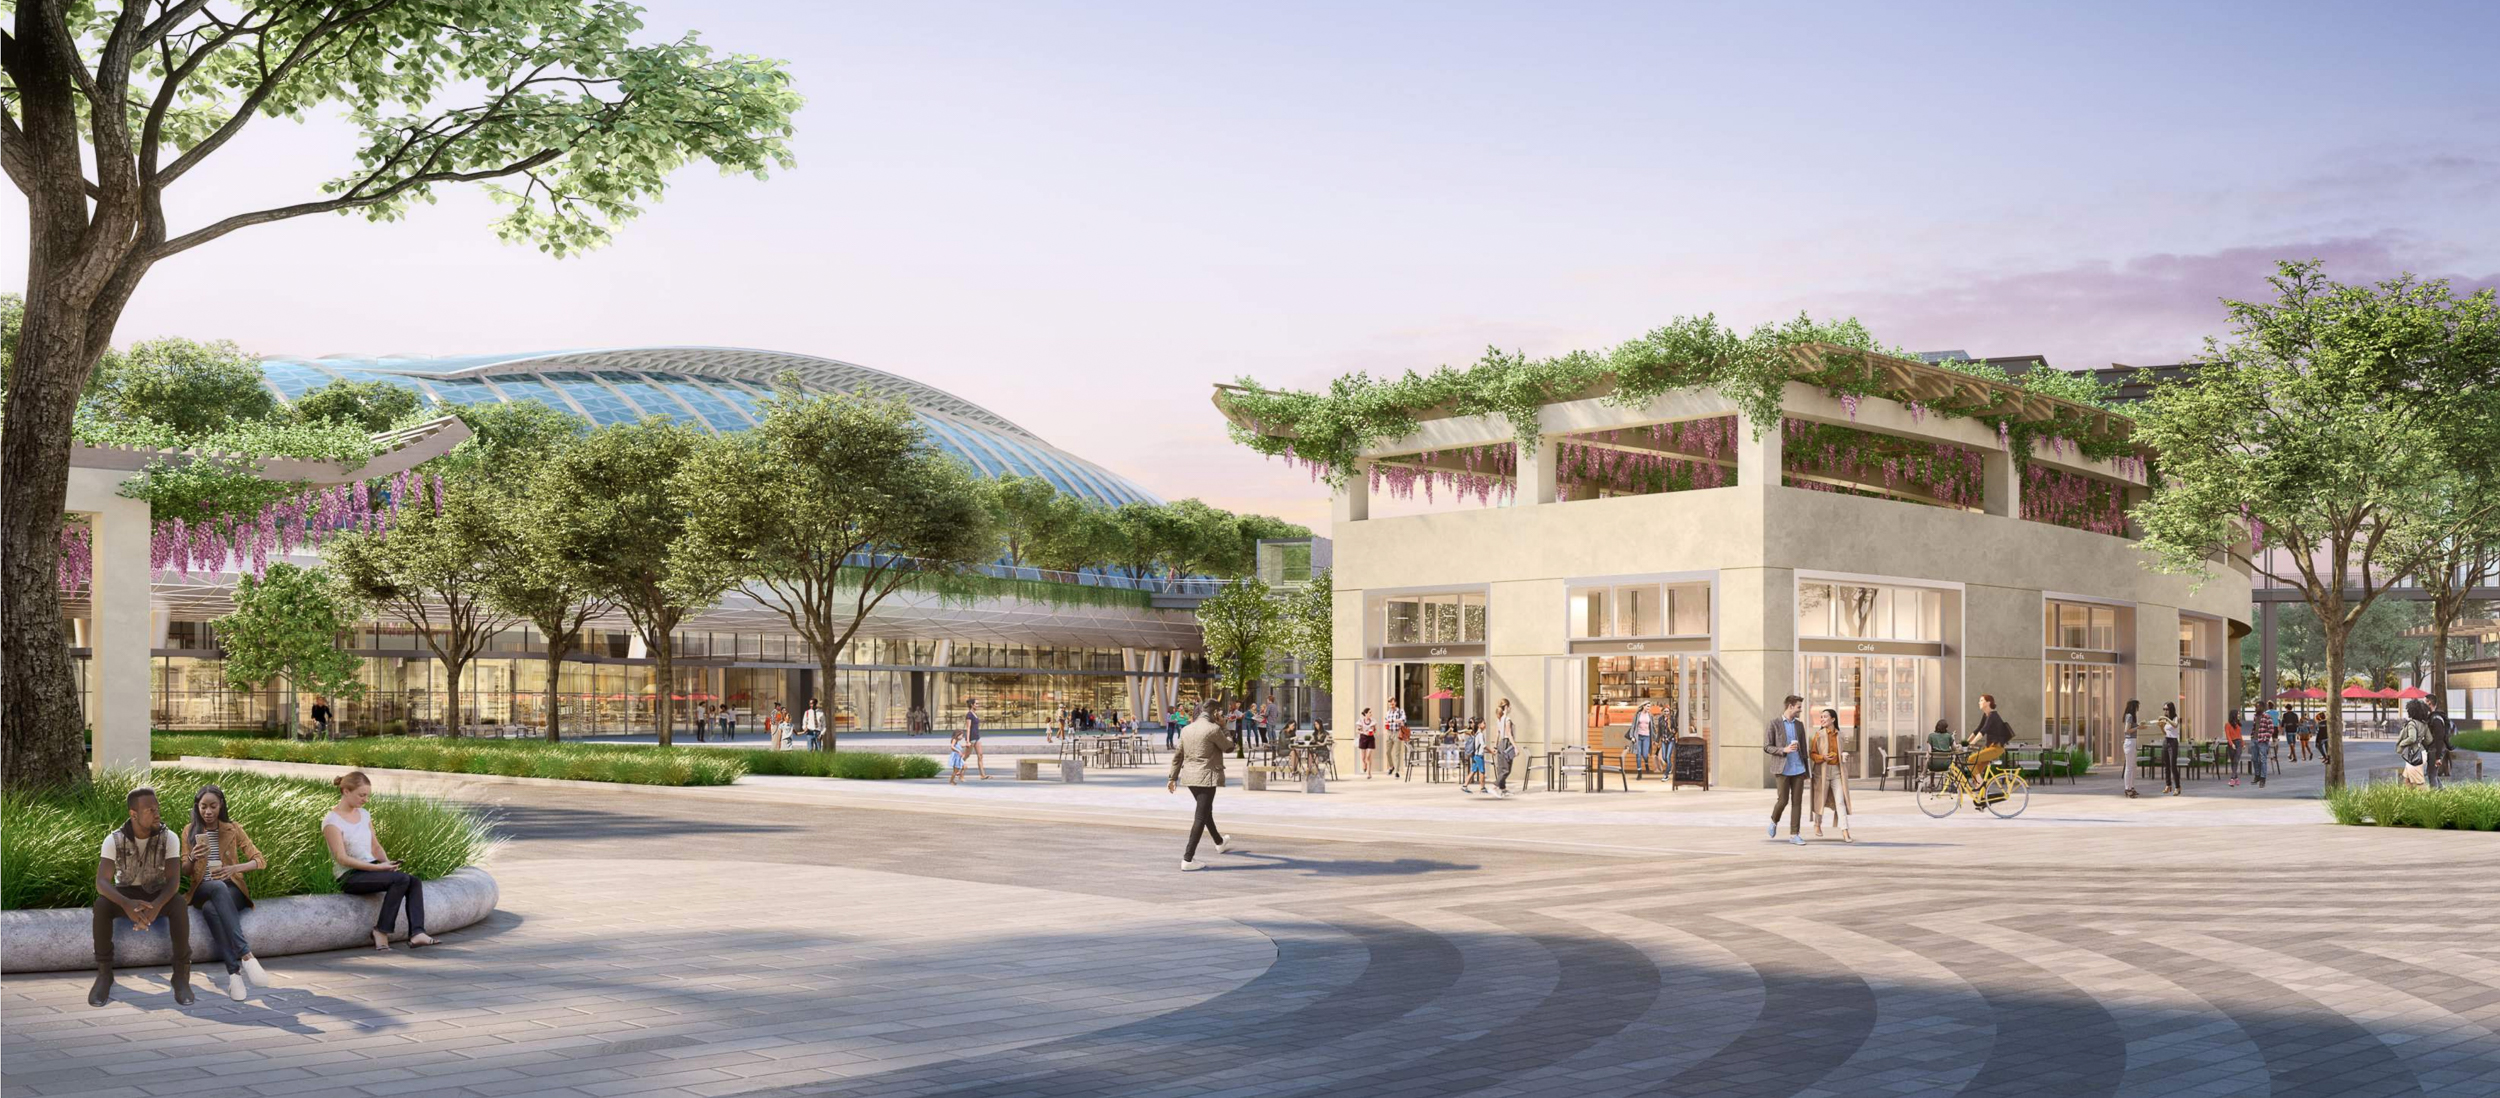 Willow Village Town Square seen from West Street and Main Street, rendering courtesy Peninsula Innovation Partners